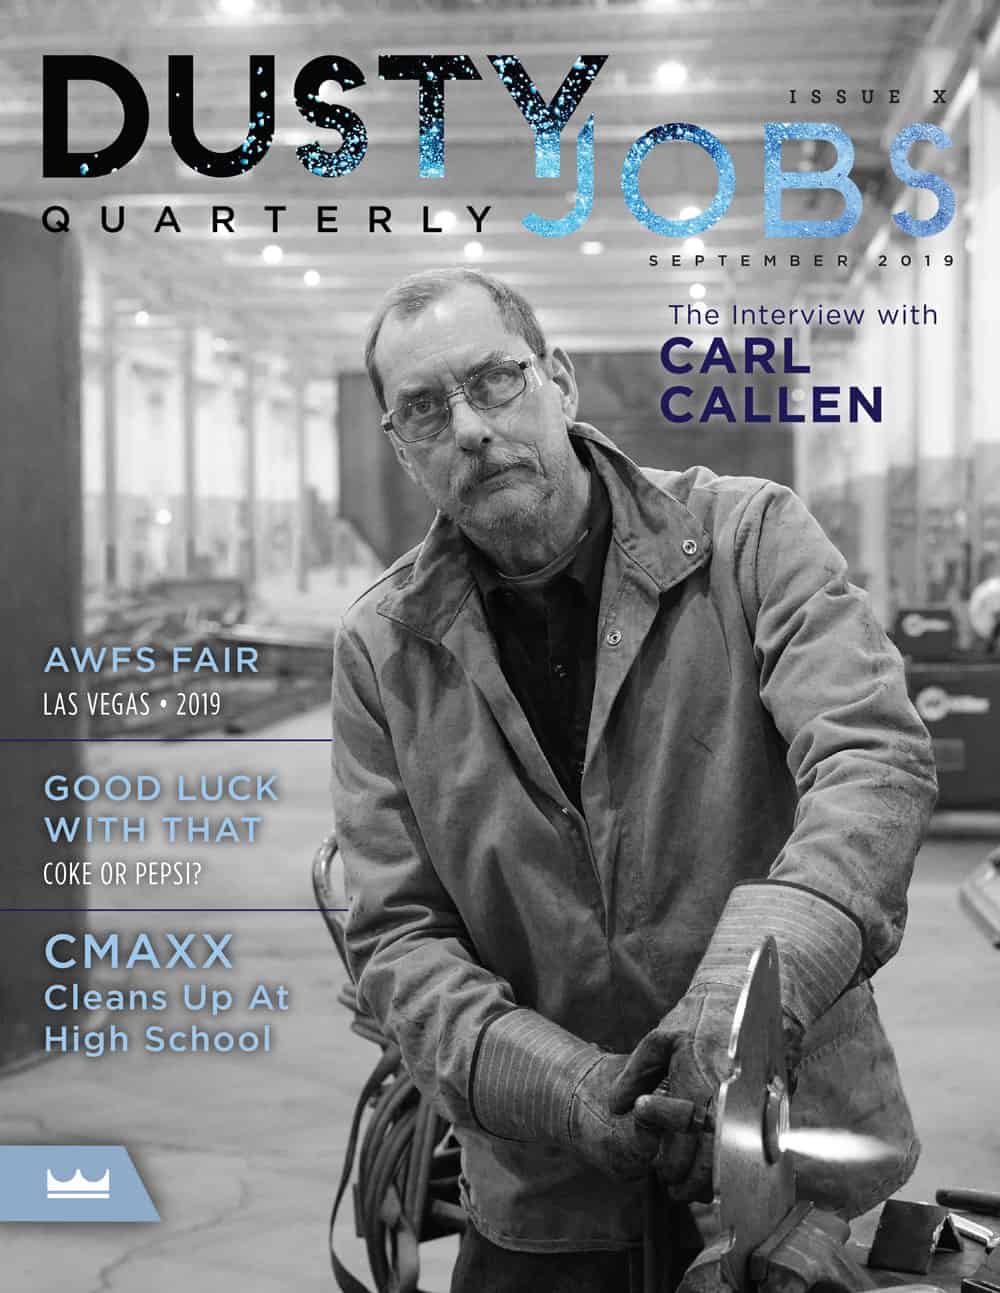 Dusty Jobs cover issue X